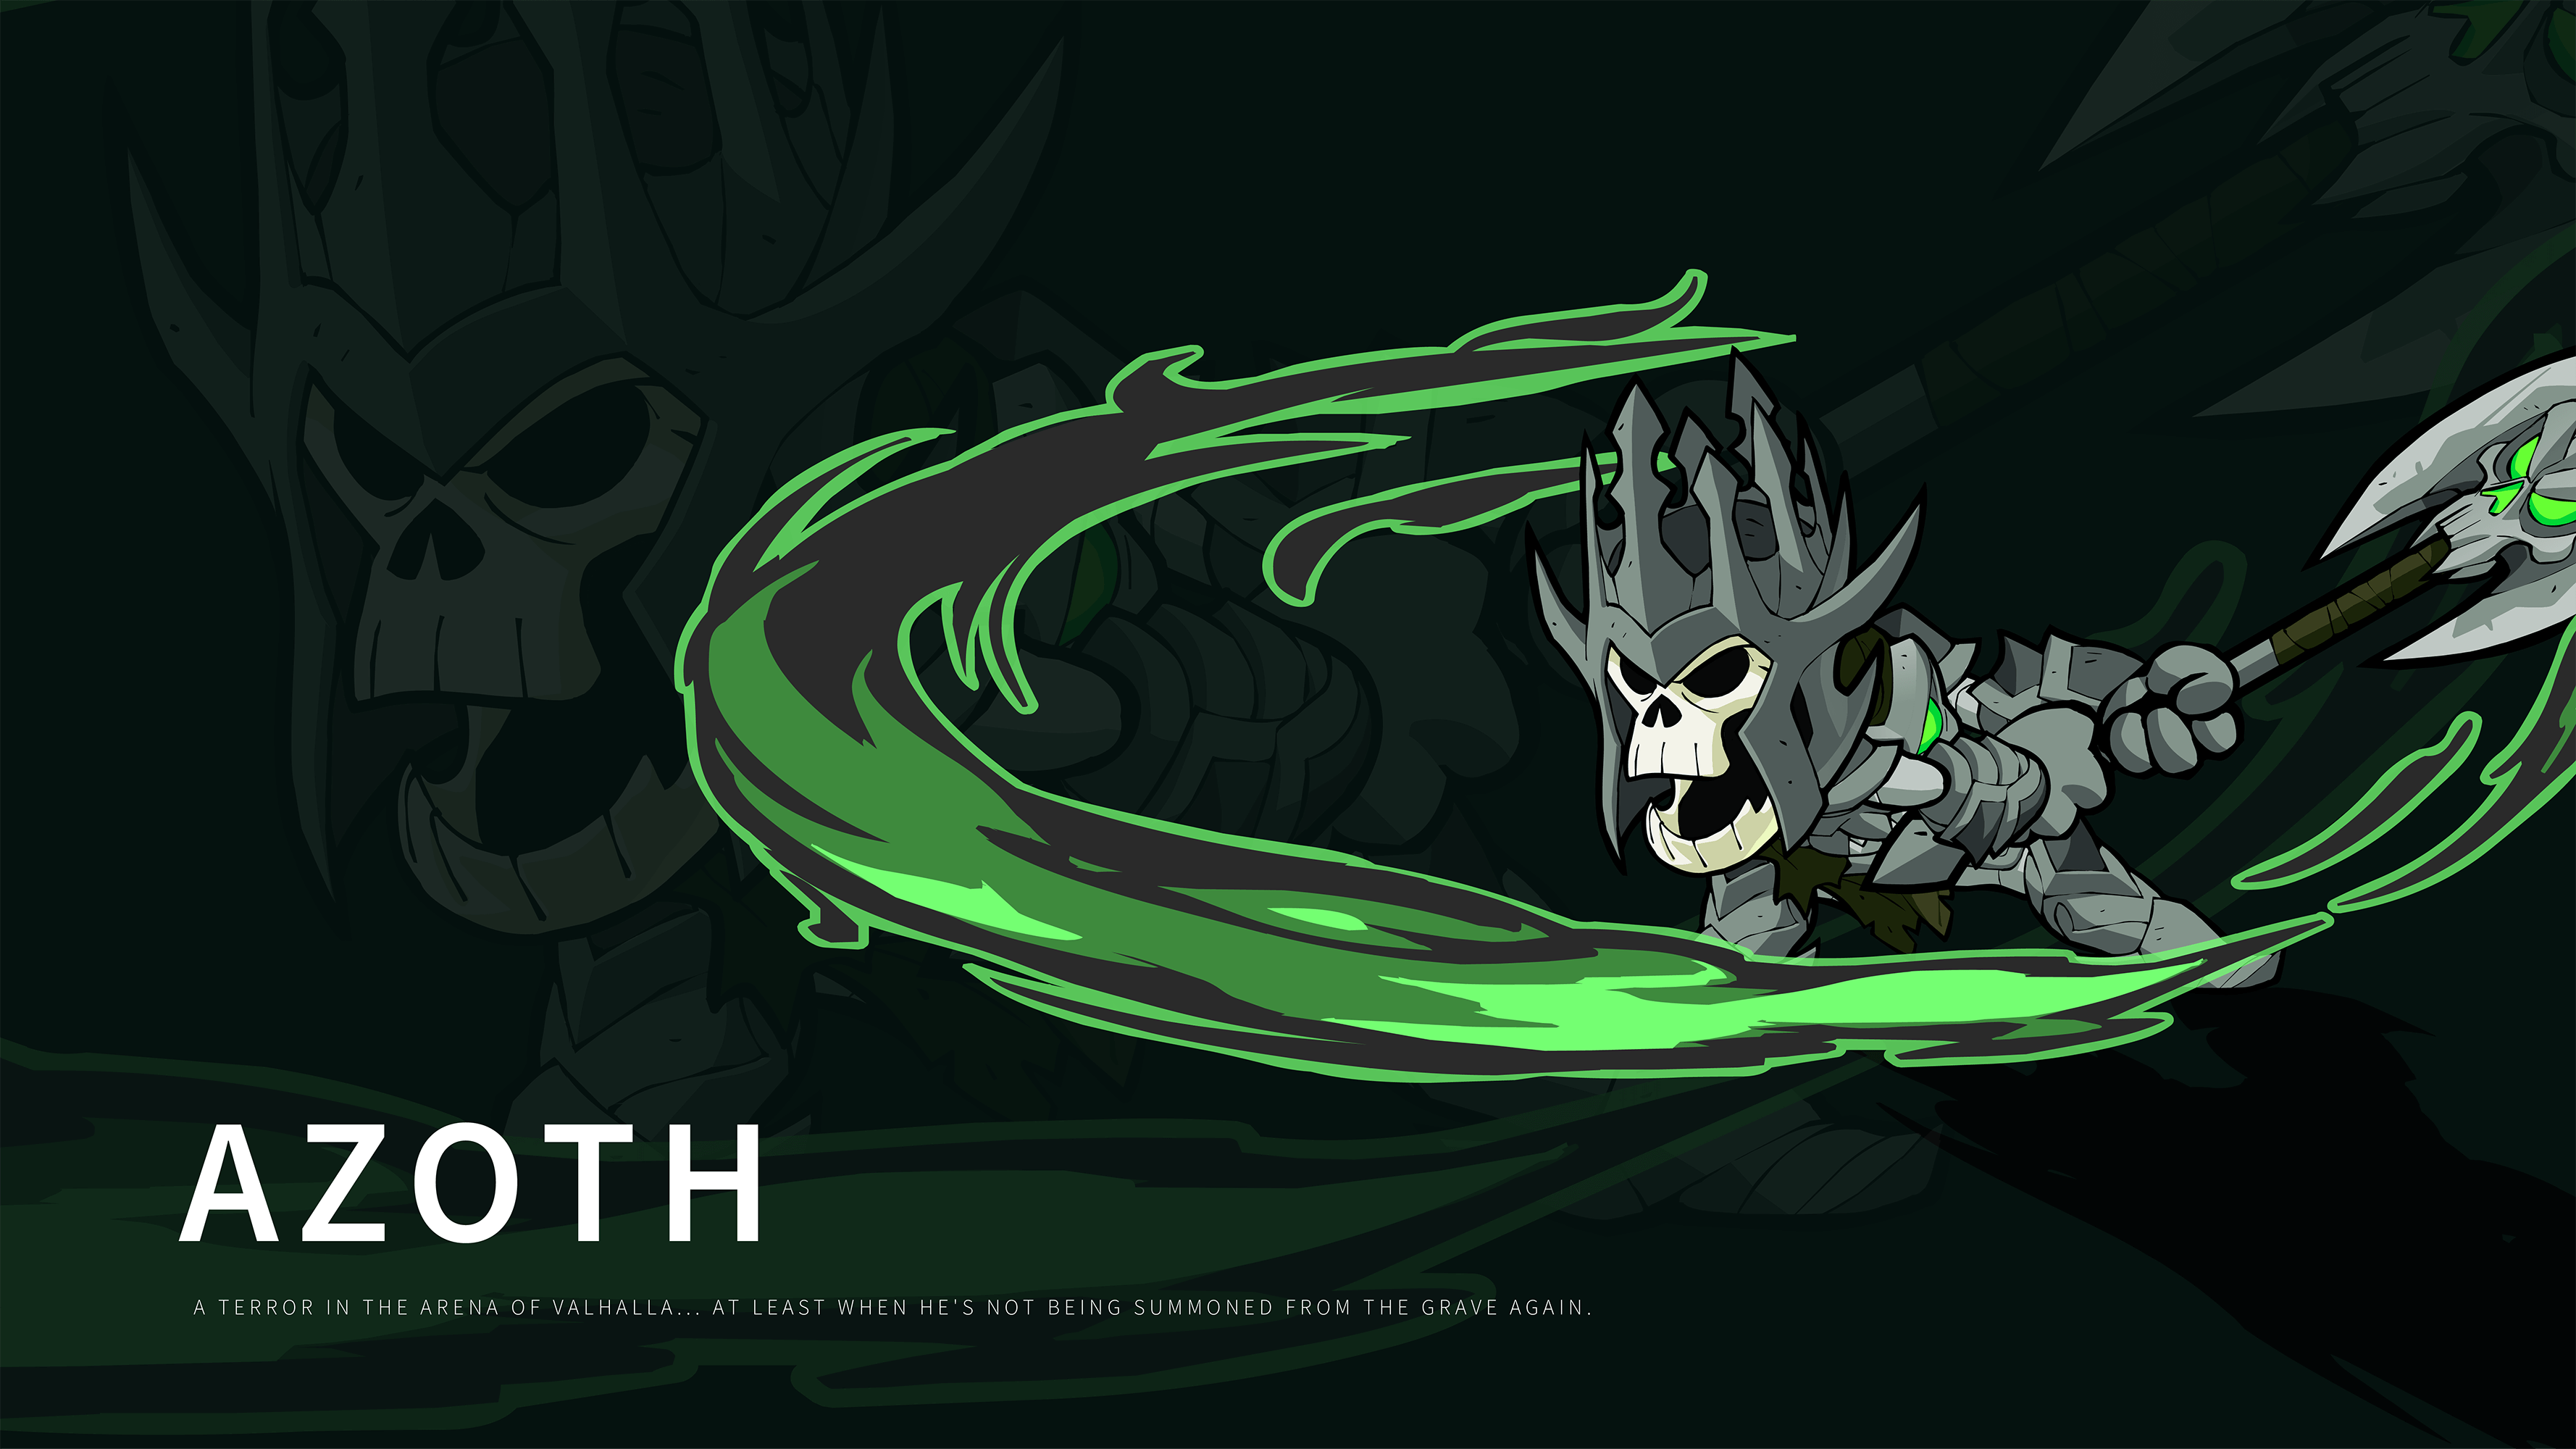 Video Game Brawlhalla HD Wallpaper | Background Image